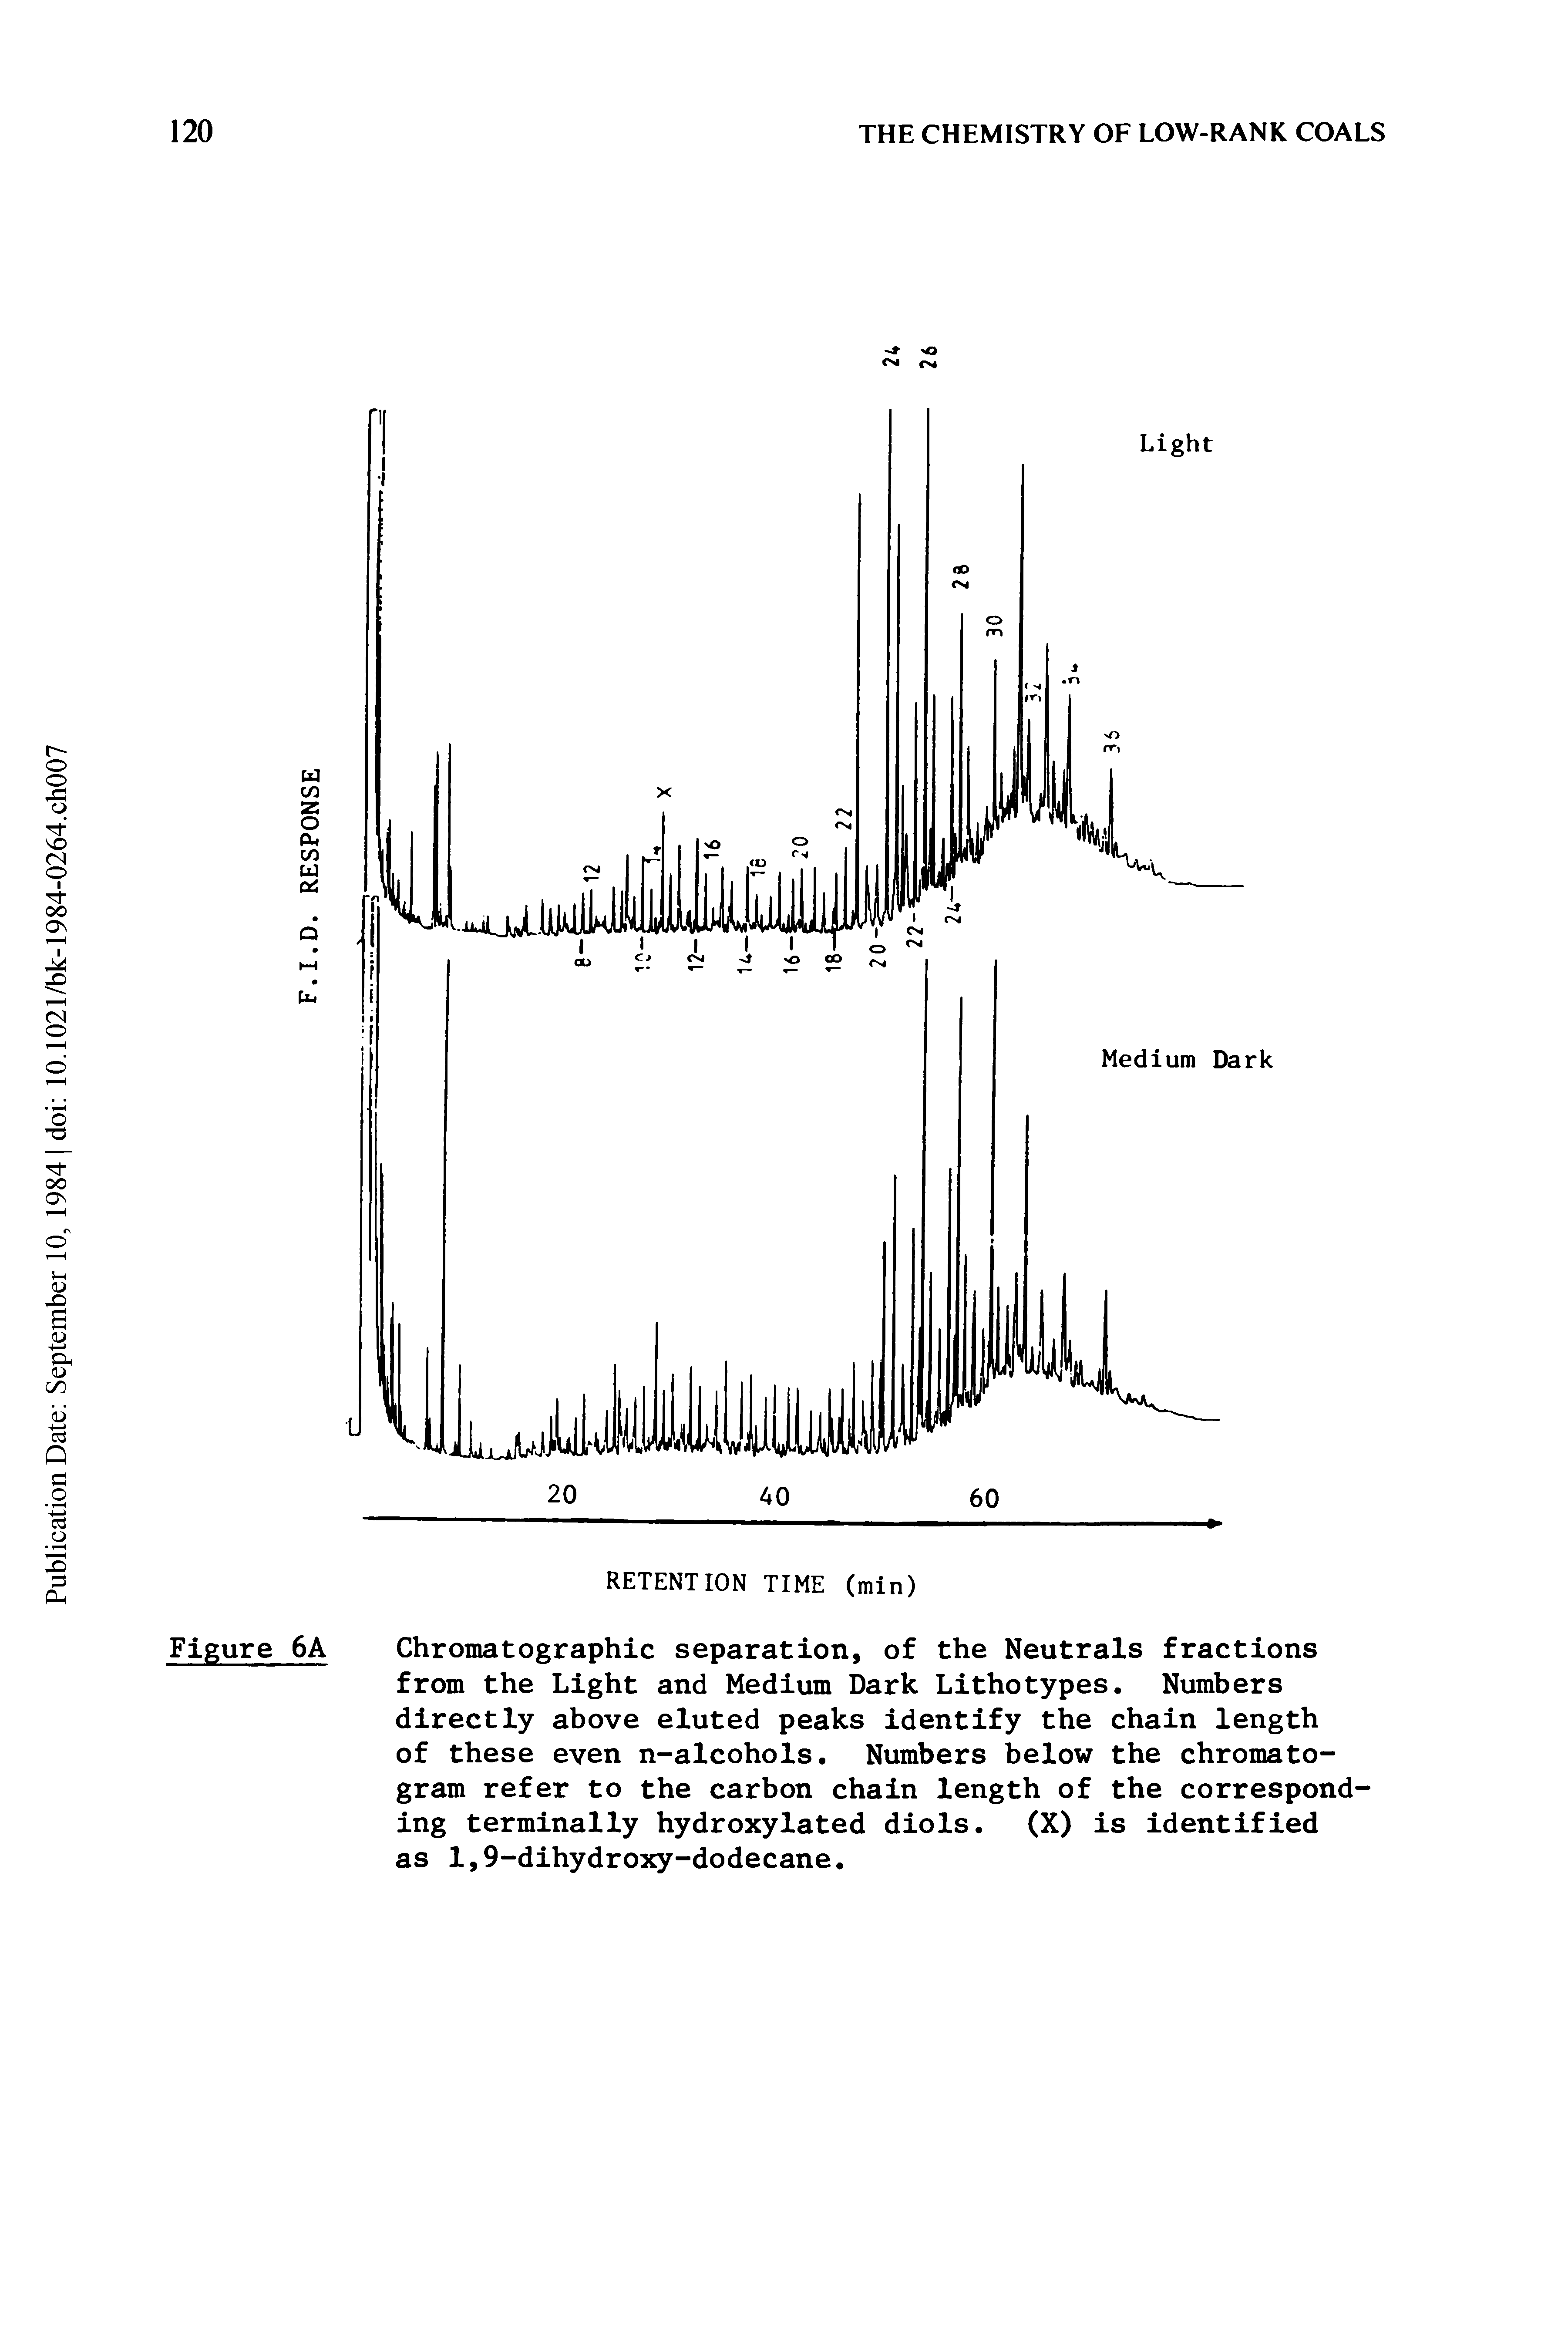 Figure 6A Chromatographic separation, of the Neutrals fractions from the Light and Medium Dark Lithotypes. Numbers directly above eluted peaks identify the chain length of these even n-alcohols. Numbers below the chromatogram refer to the carbon chain length of the corresponding terminally hydroxylated diols. (X) is identified as 1,9-dihydroxy-dodecane.